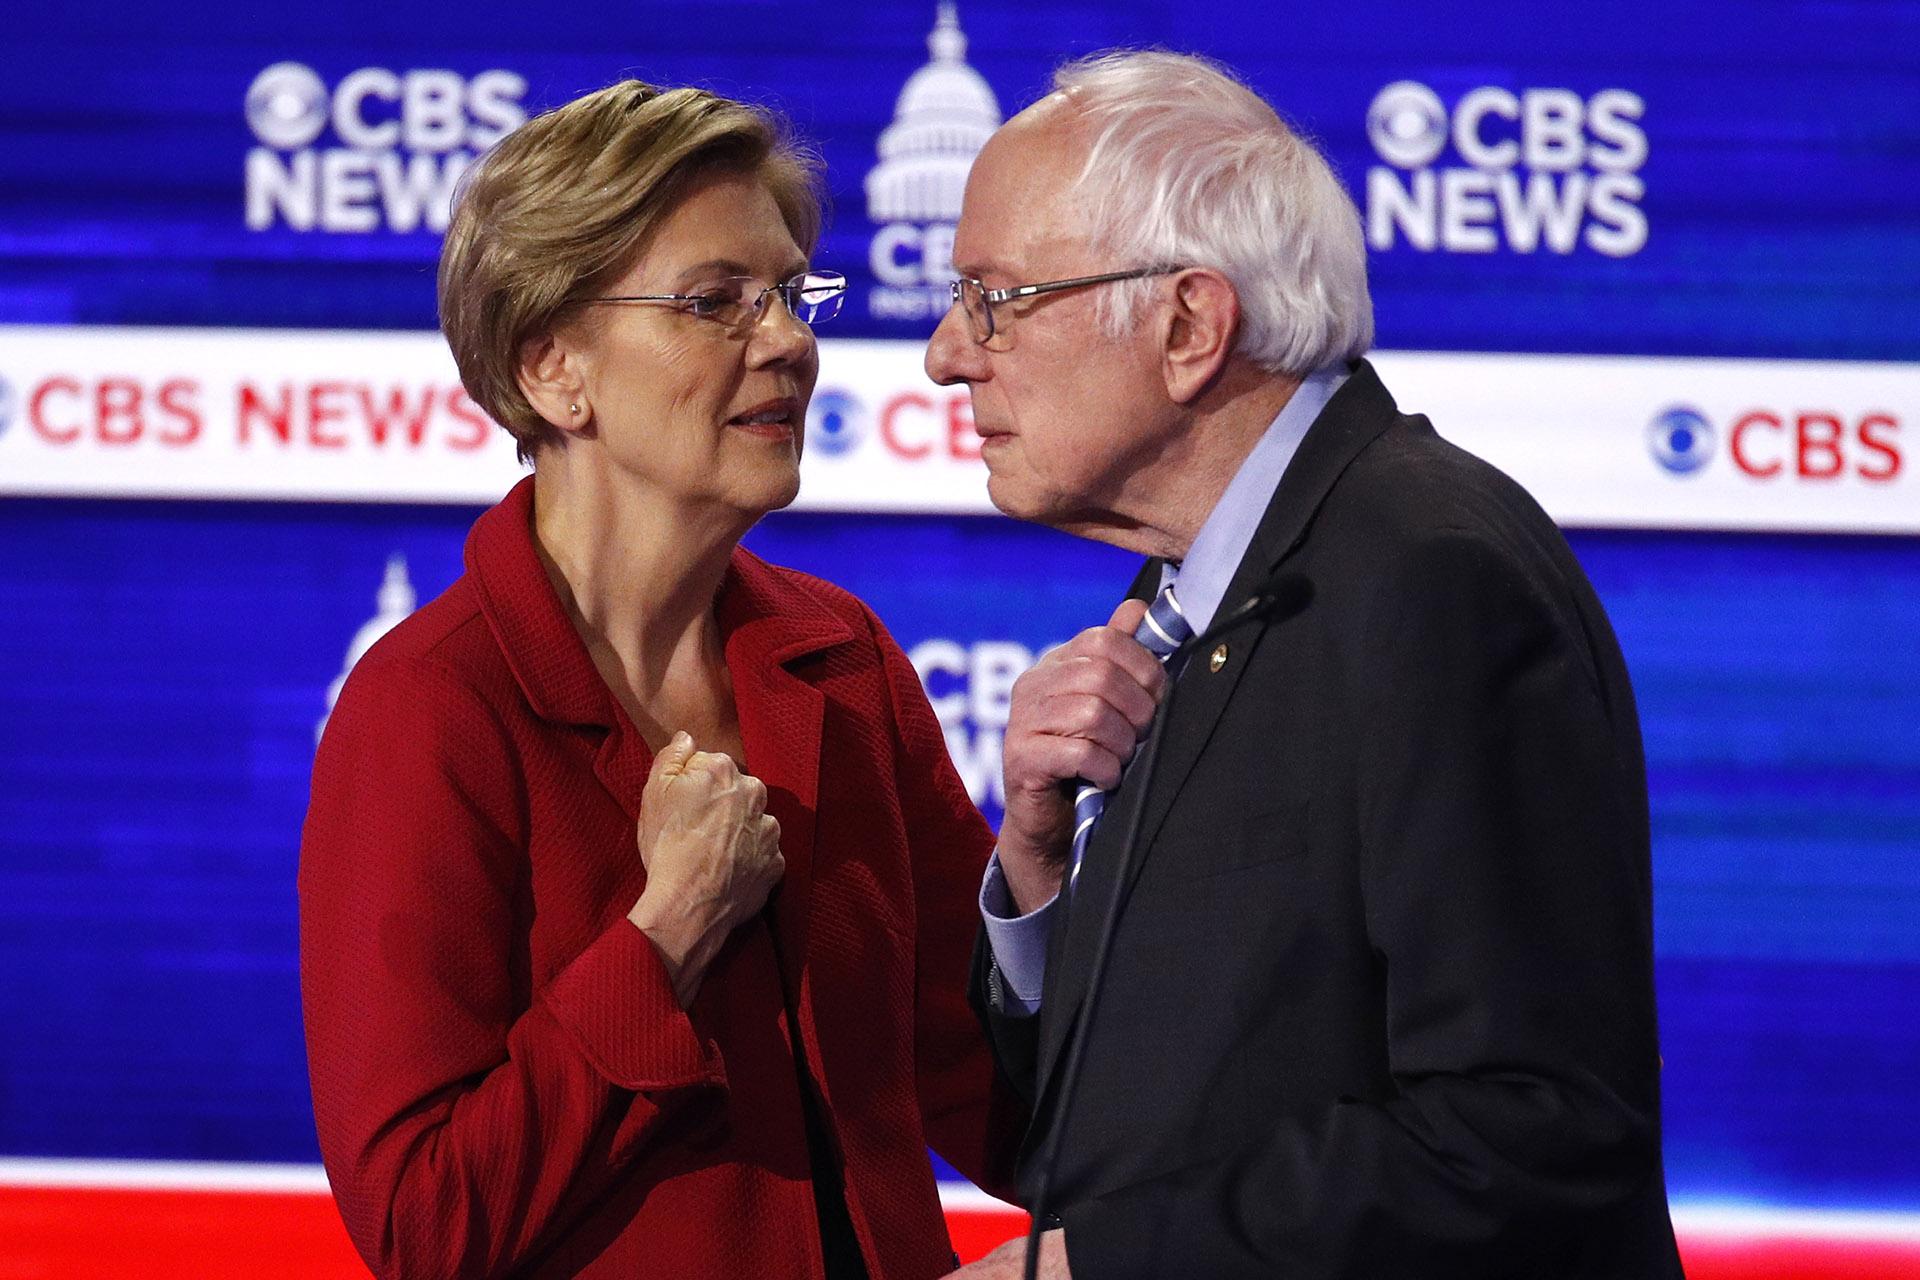 From left, Democratic presidential candidates, Sen. Elizabeth Warren, D-Mass., talks with Sen. Bernie Sanders, I-Vt., during a Democratic presidential primary debate at the Gaillard Center, Tuesday, Feb. 25, 2020, in Charleston, S.C., co-hosted by CBS News and the Congressional Black Caucus Institute. (AP Photo / Patrick Semansky)